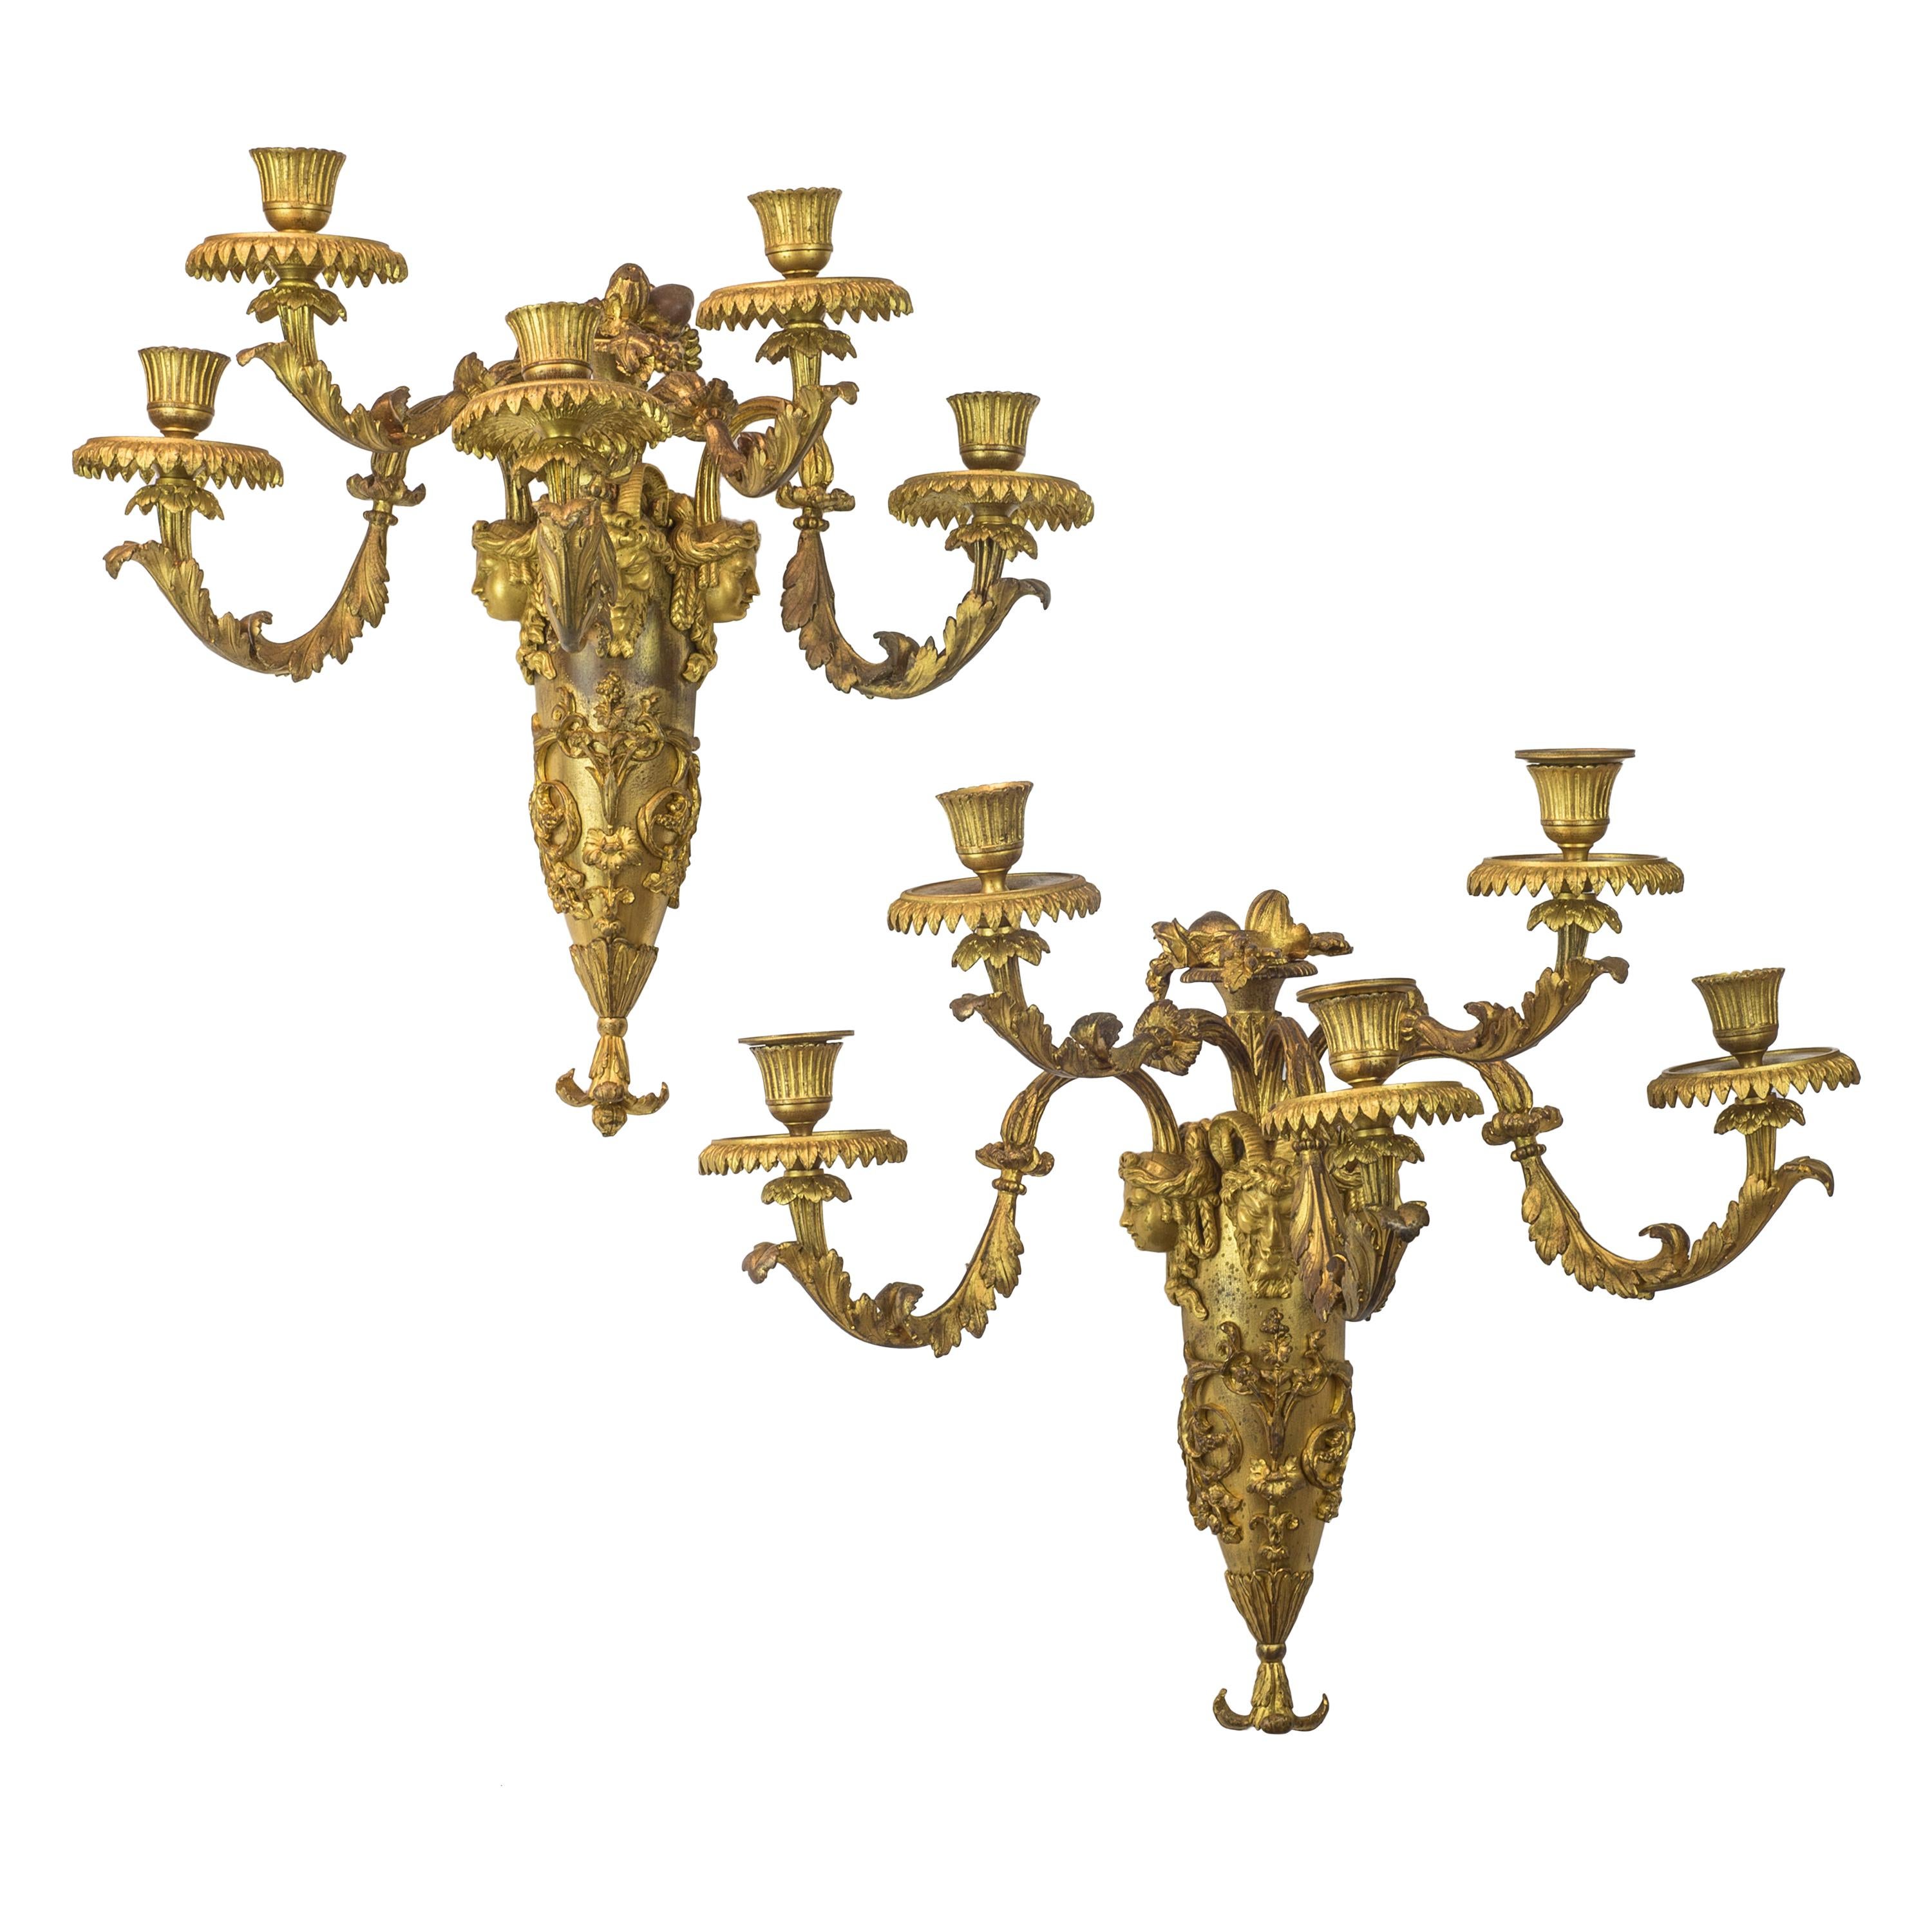 Pair of French Louis XVI Style Gilt Bronze Five-light Wall Sconces